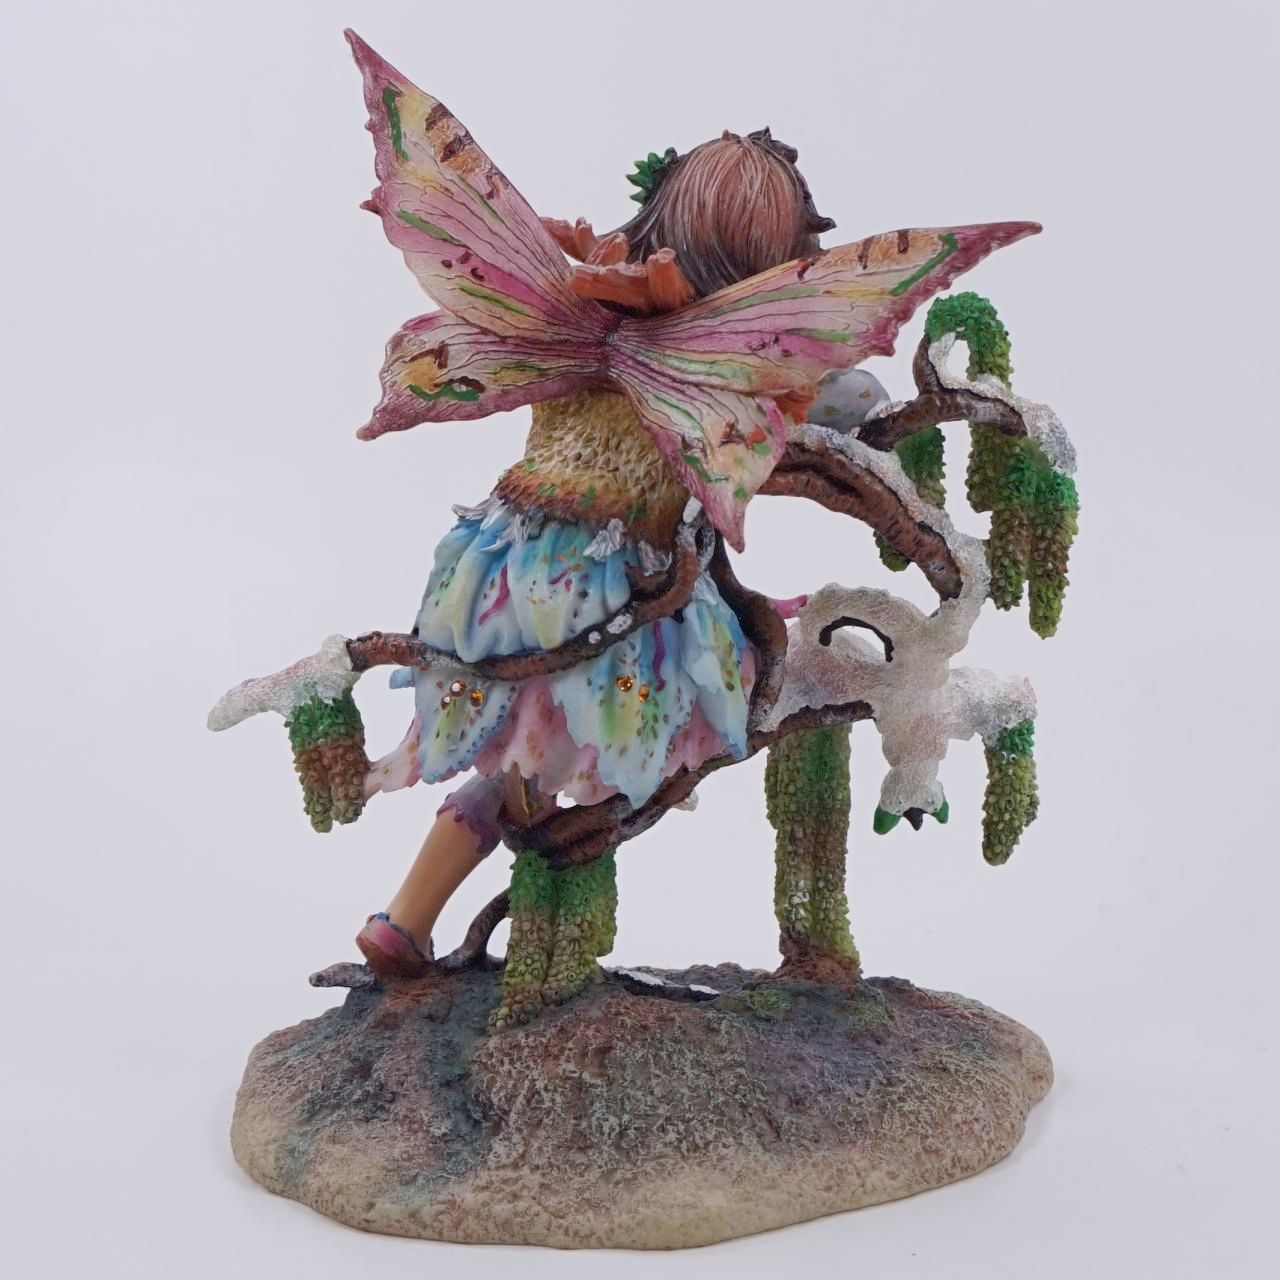 Crisalis Collection★ Early Catkin Faerie (1-244) 10% OFF